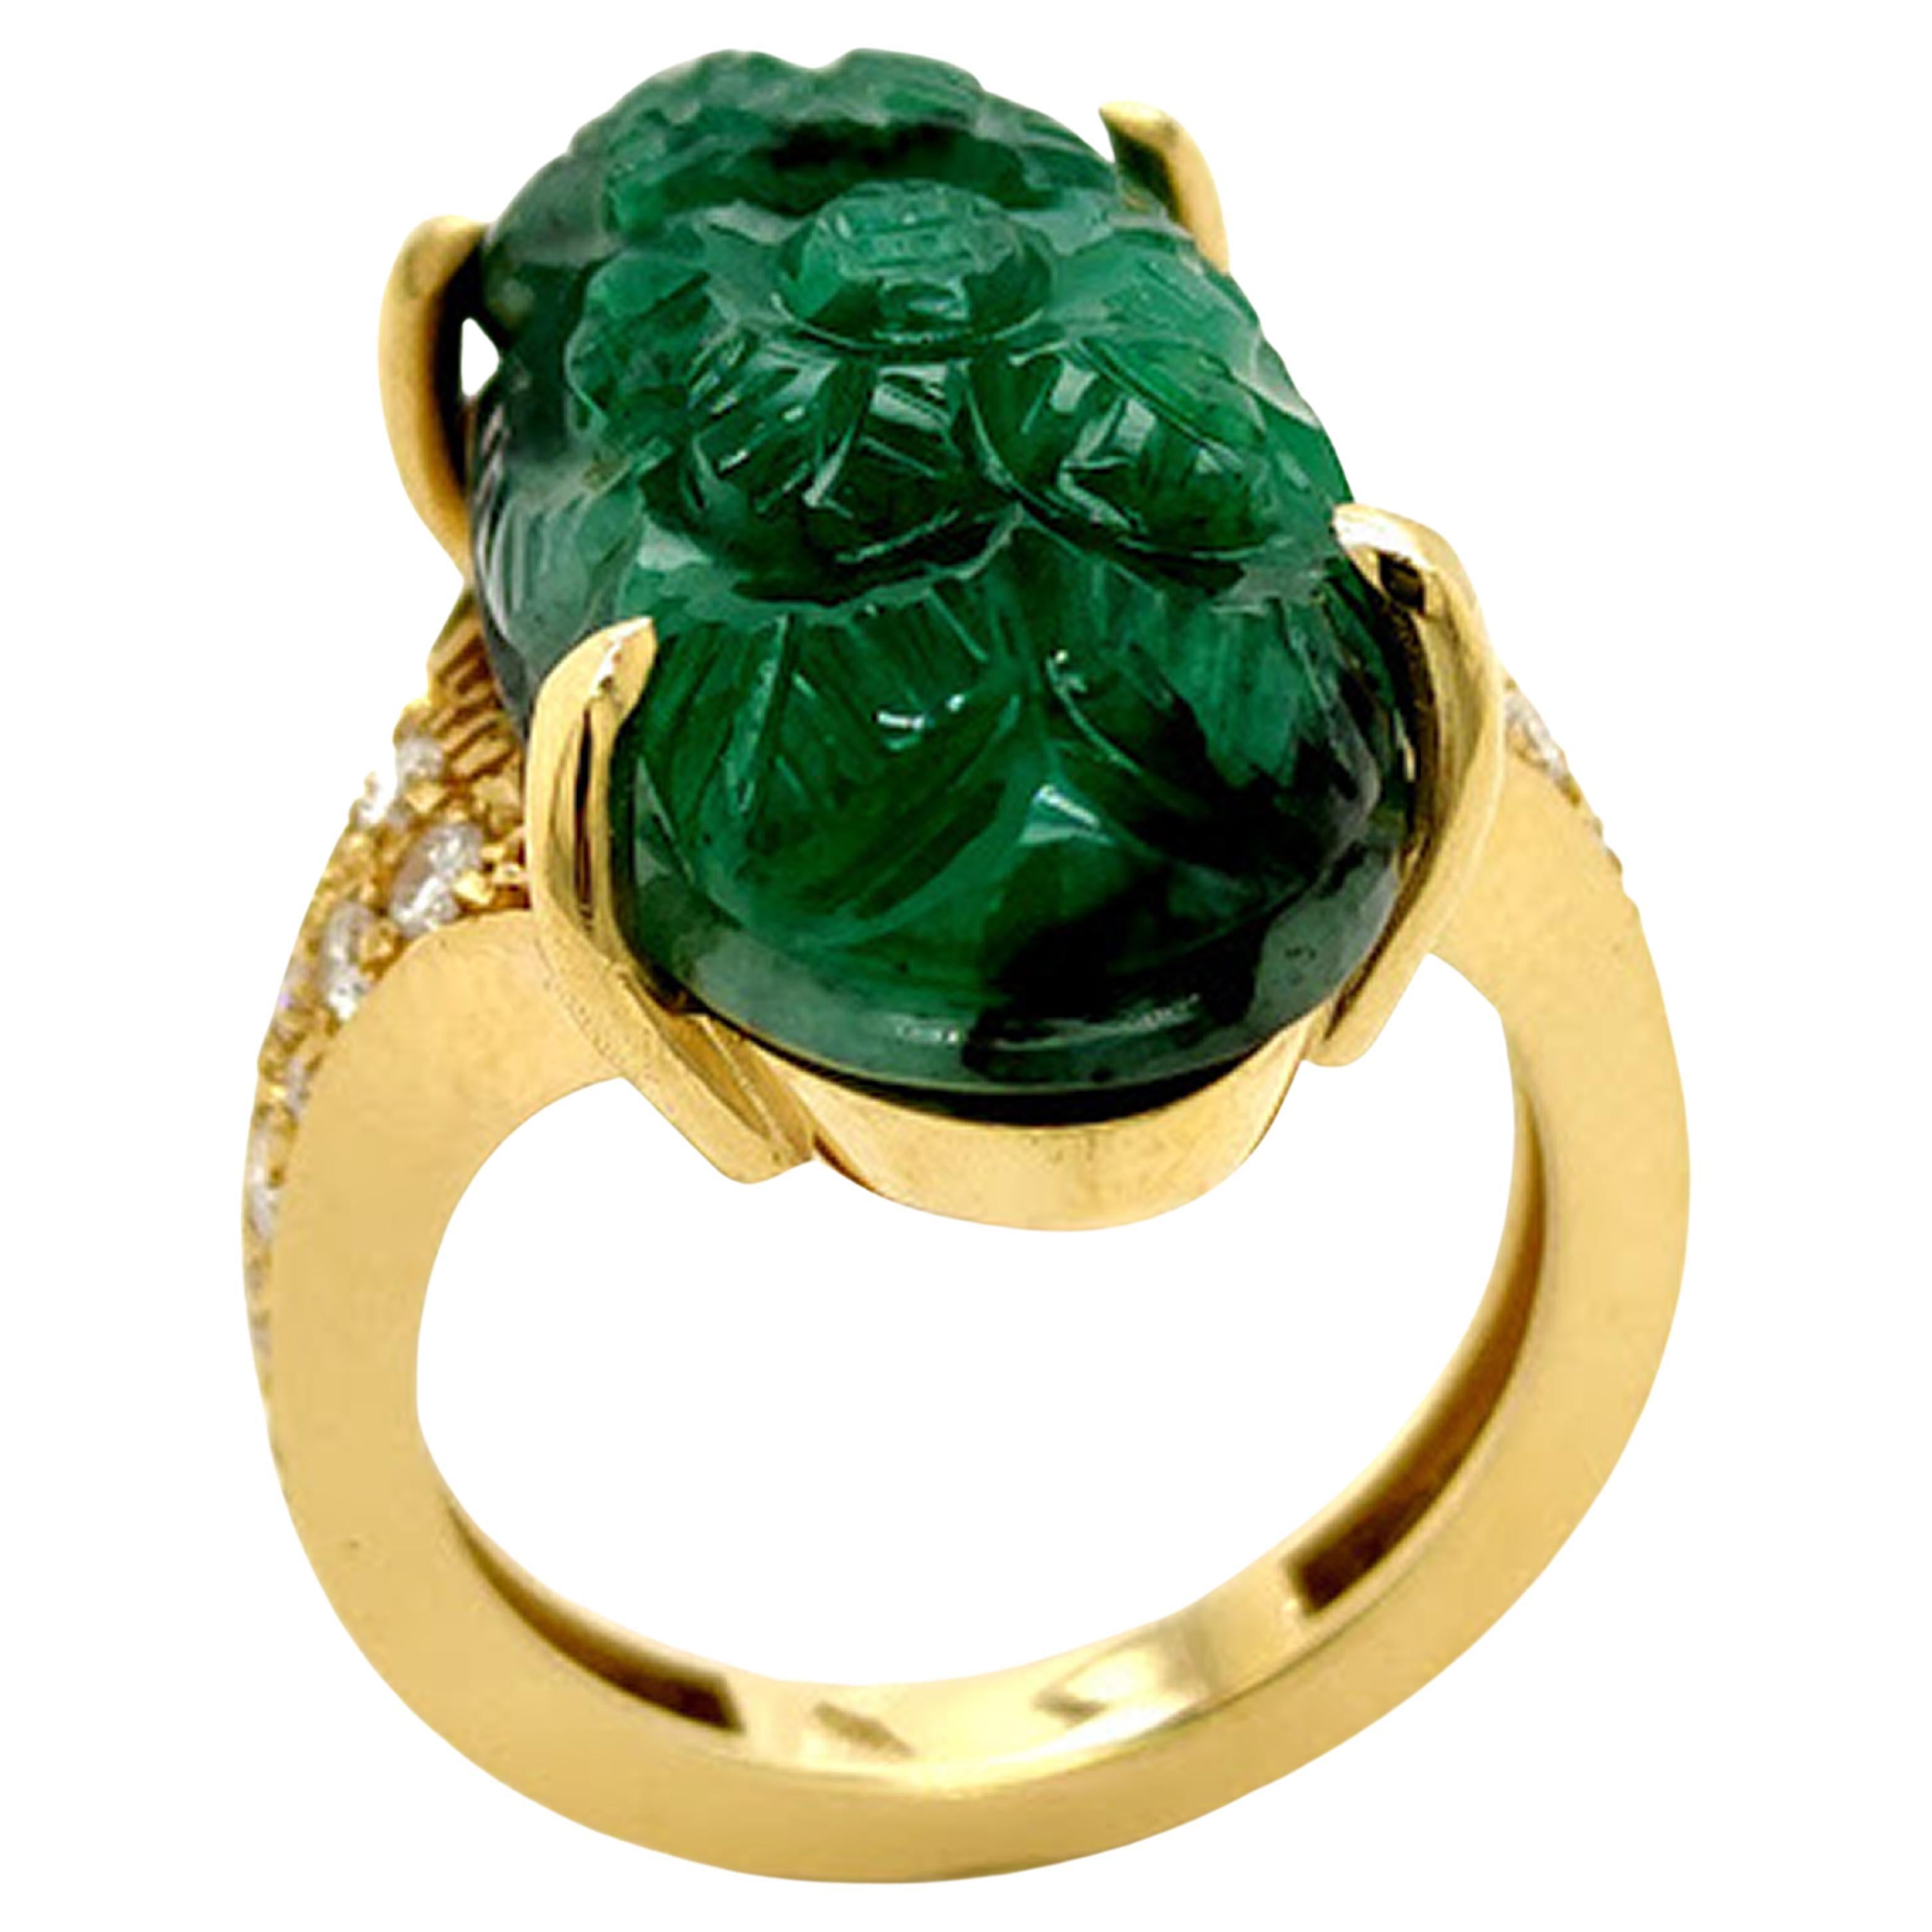 Berca 16.38Kt Emerald Engraved Cabochon White Diamond Yellow Gold Cocktail Ring